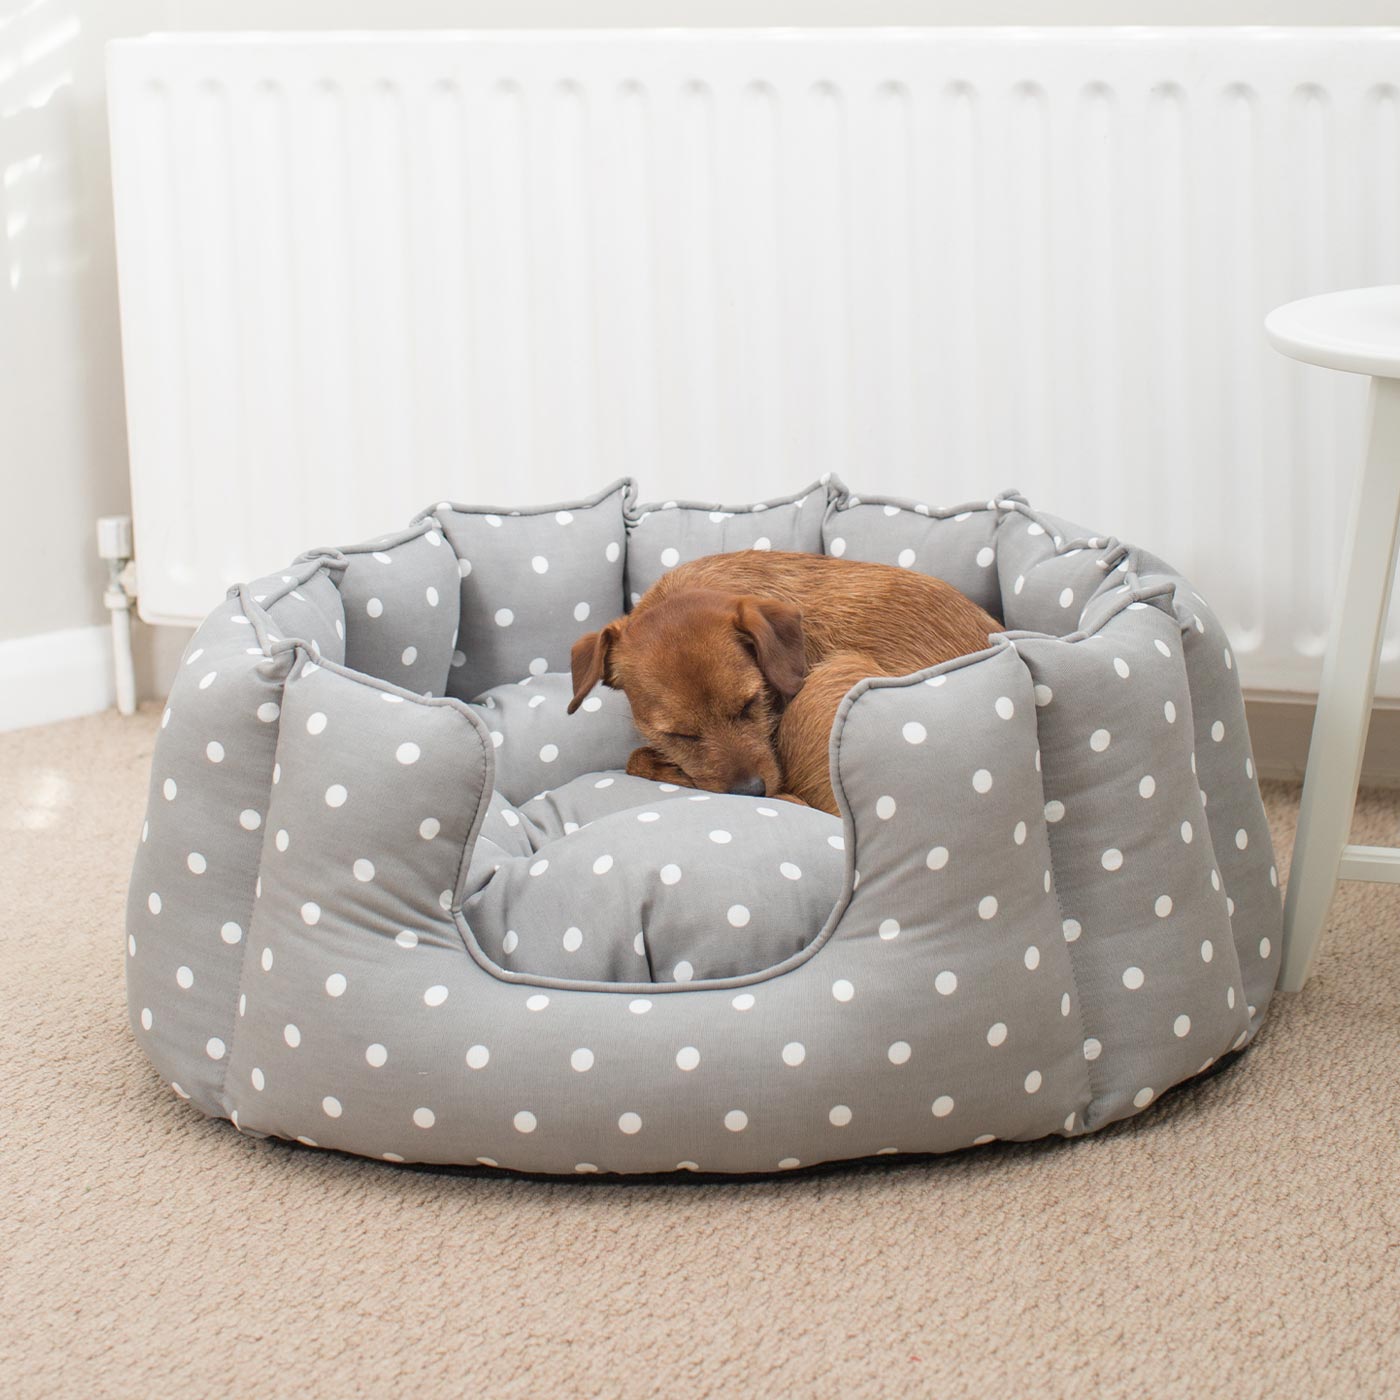 Discover Our Luxurious High Wall Bed For Dogs & Puppies, Featuring Reversible Inner Cushion With Teddy Fleece To Craft The Perfect Dog Bed In Stunning Grey Spot! Available To Personalise Now at Lords & Labradors 